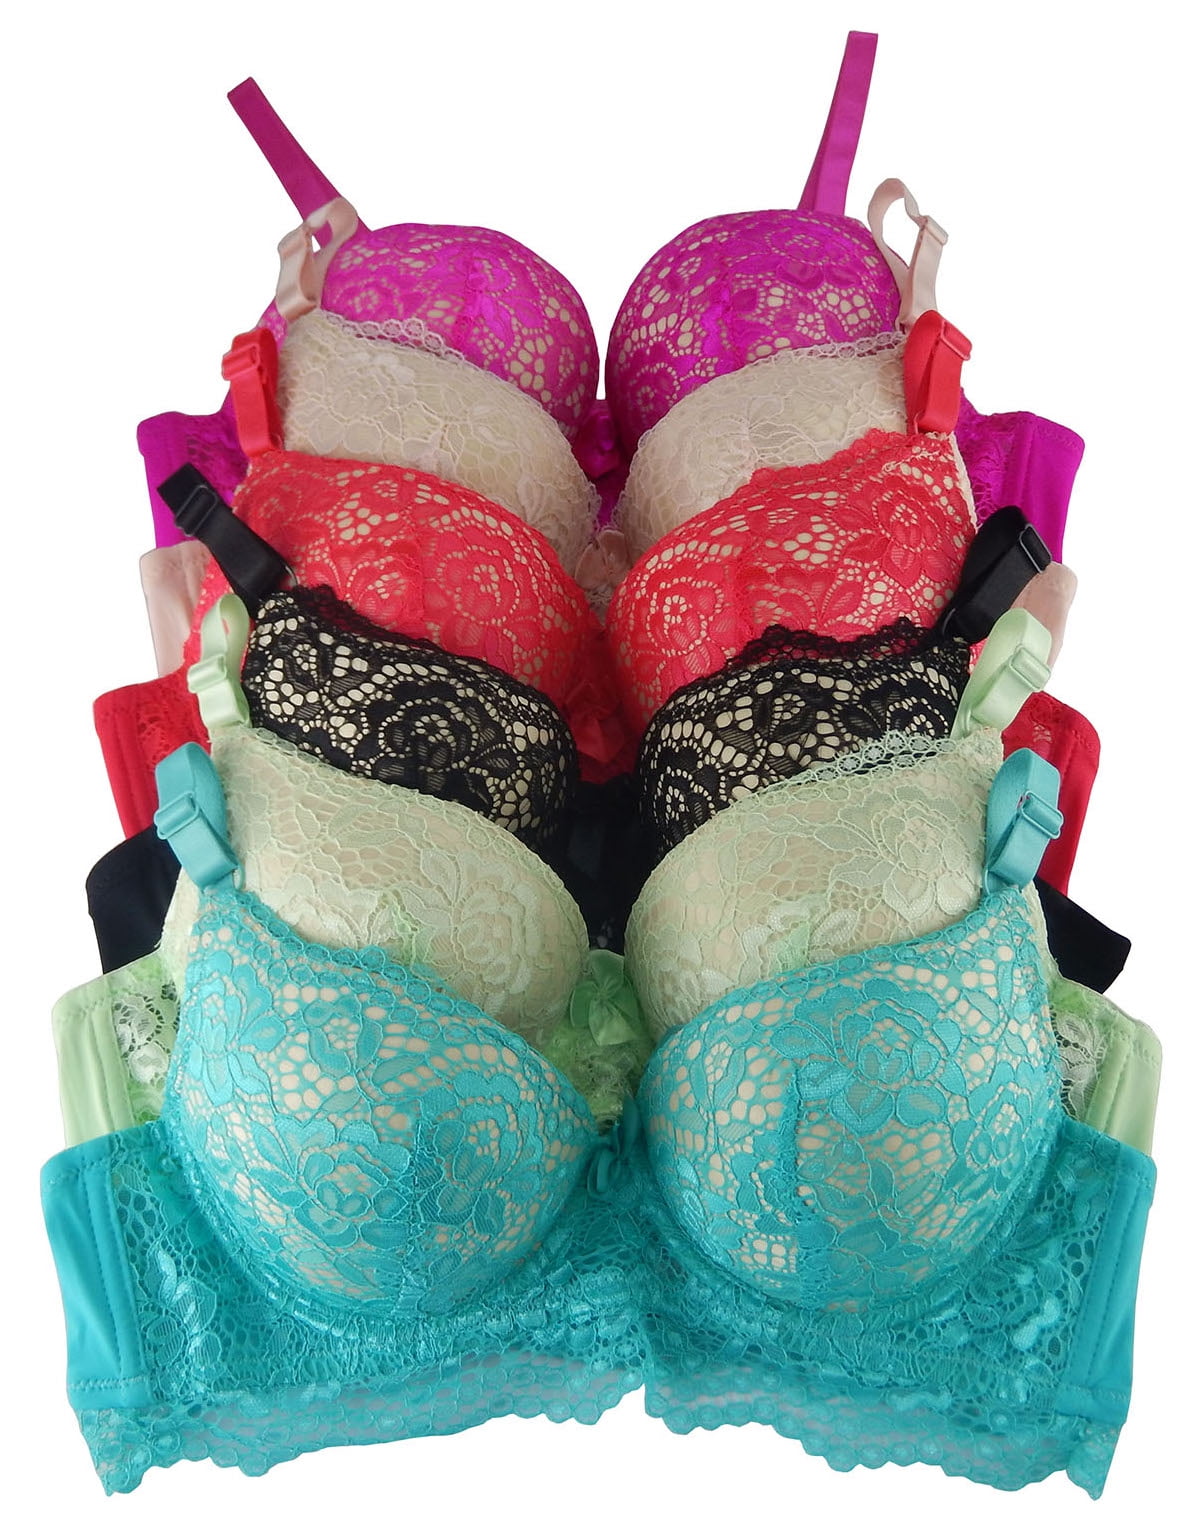 Women Lace Bras 6 pack of Lace Double Pushup Bra B cup C cup, Size 36B  (9329)